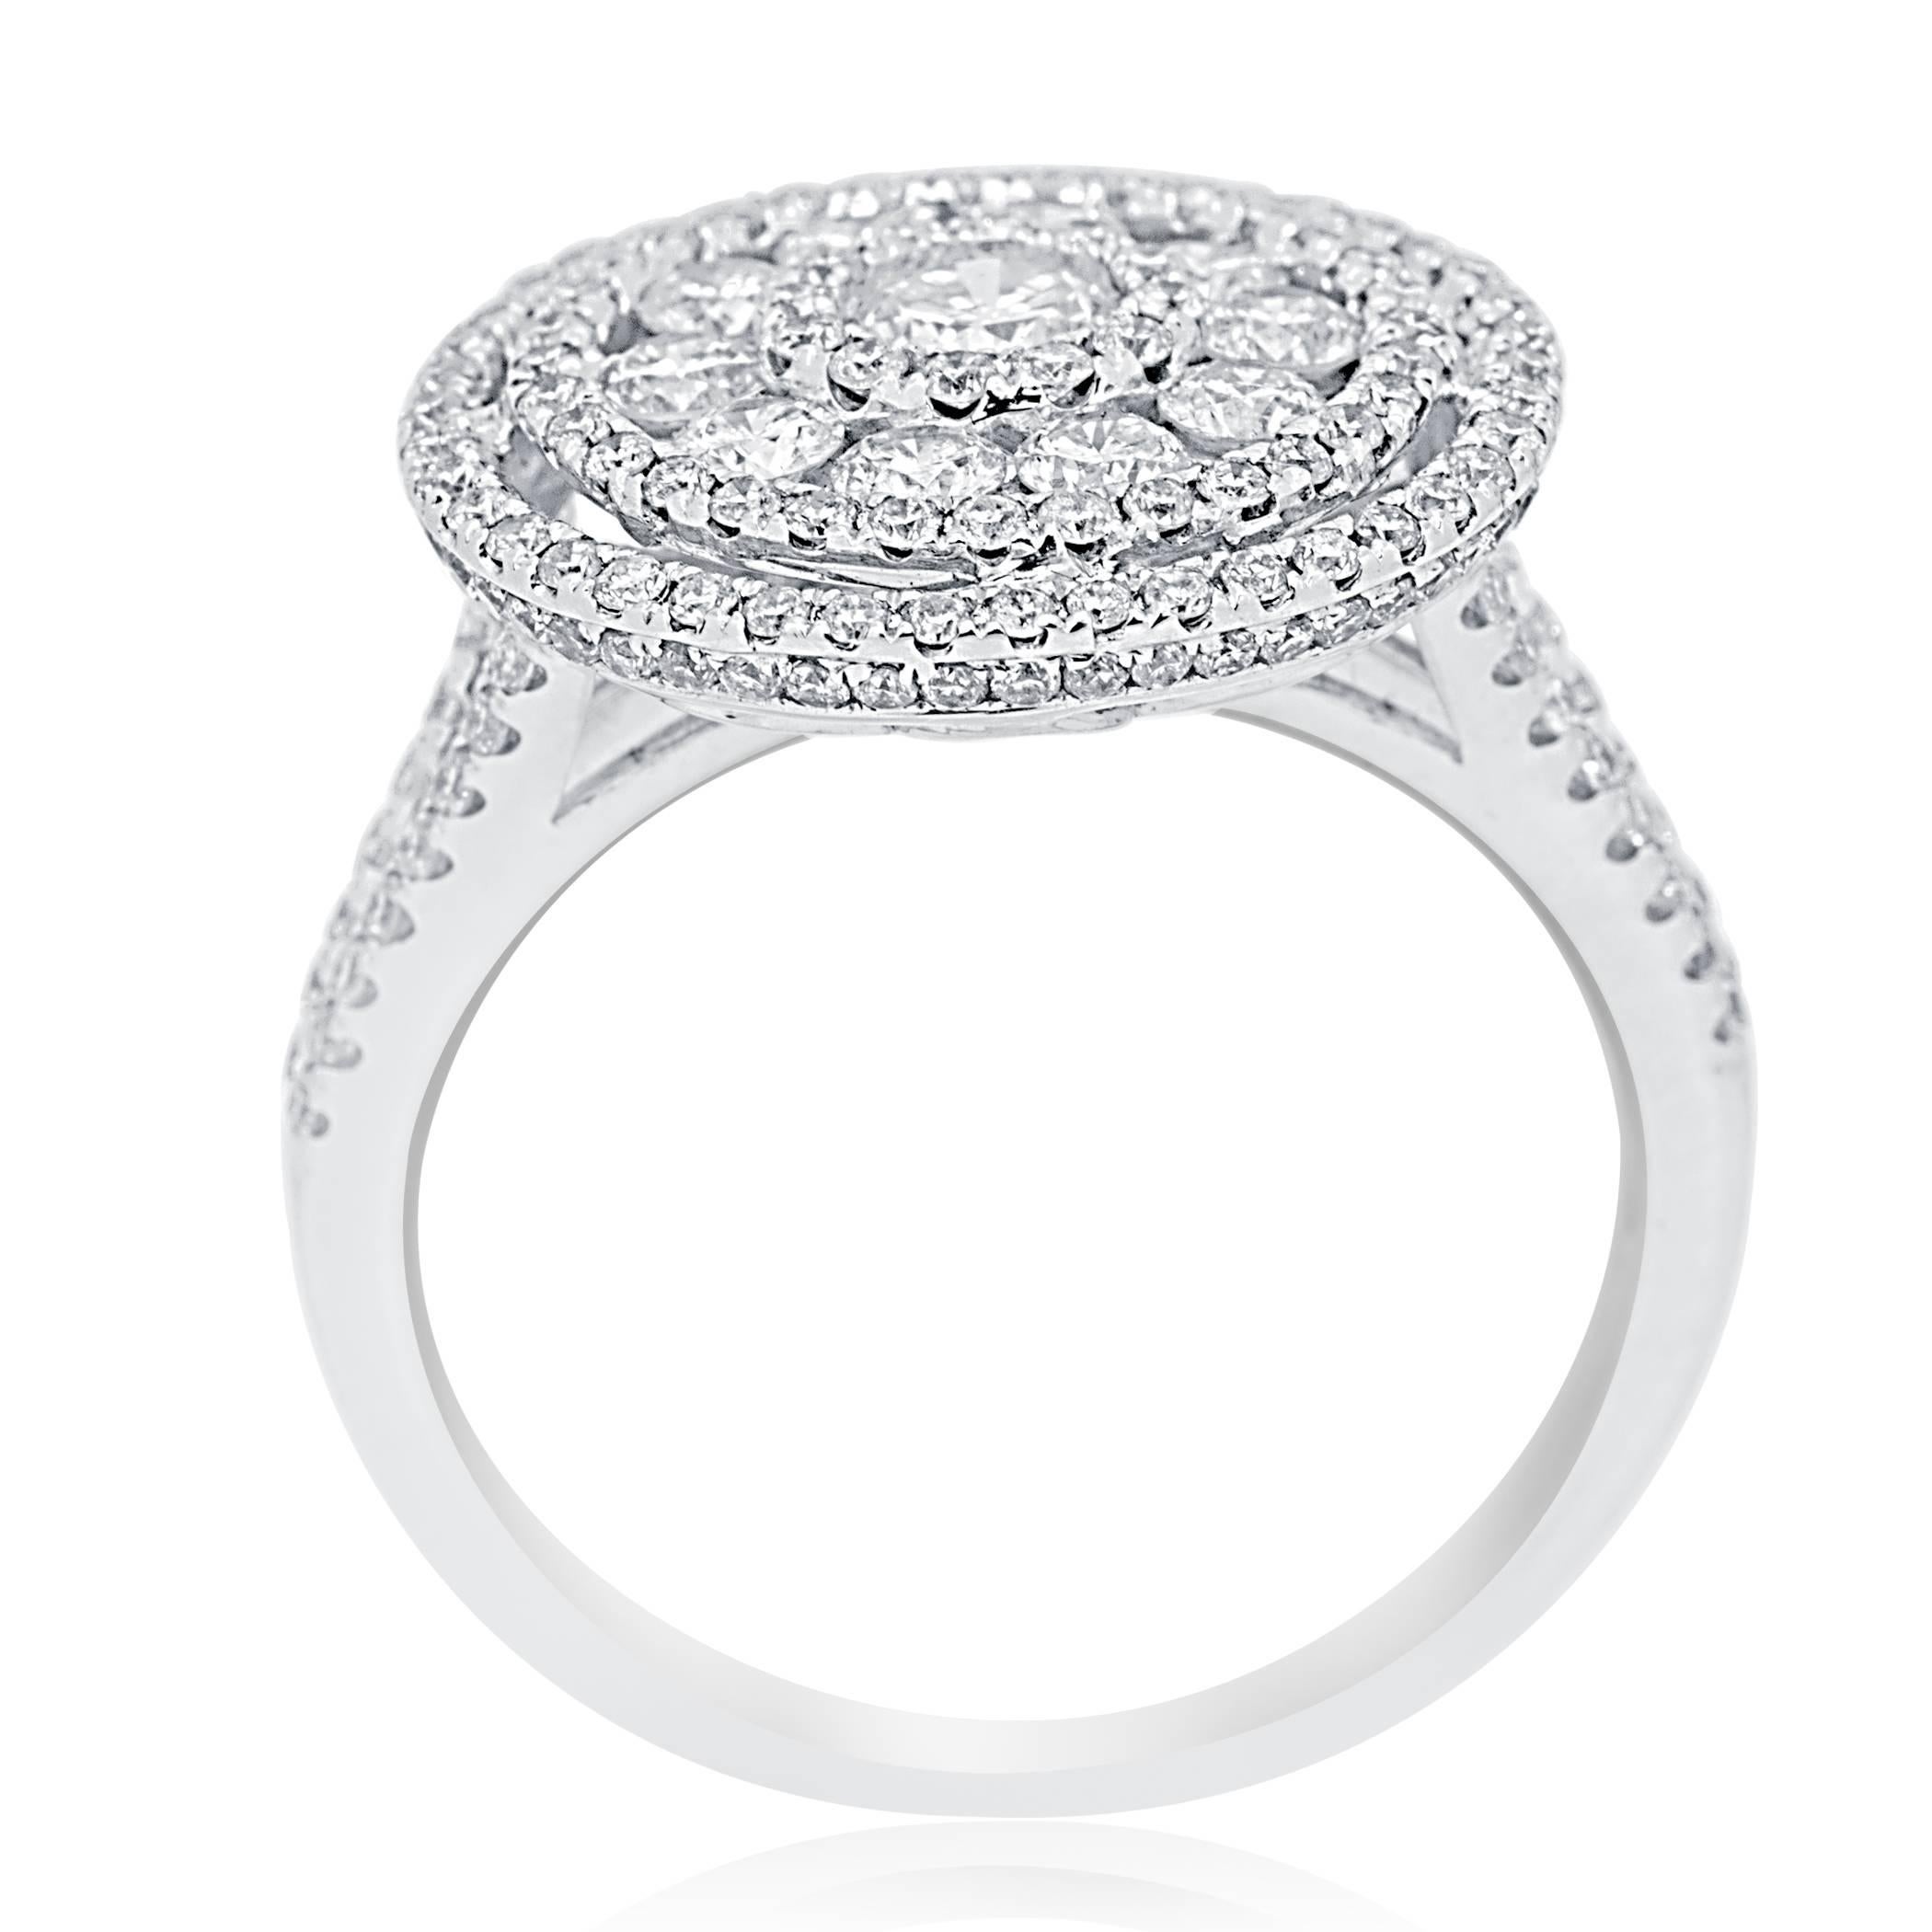 Stunning Big look Disc Style White Diamonds G-H Color SI clarity Rounds 1.65 Carat total weight set in 14K White Gold in cluster look micro pave Cocktail fashion ring perfect for all occasions and events.

Total Diamond Weight 1.65 Carat